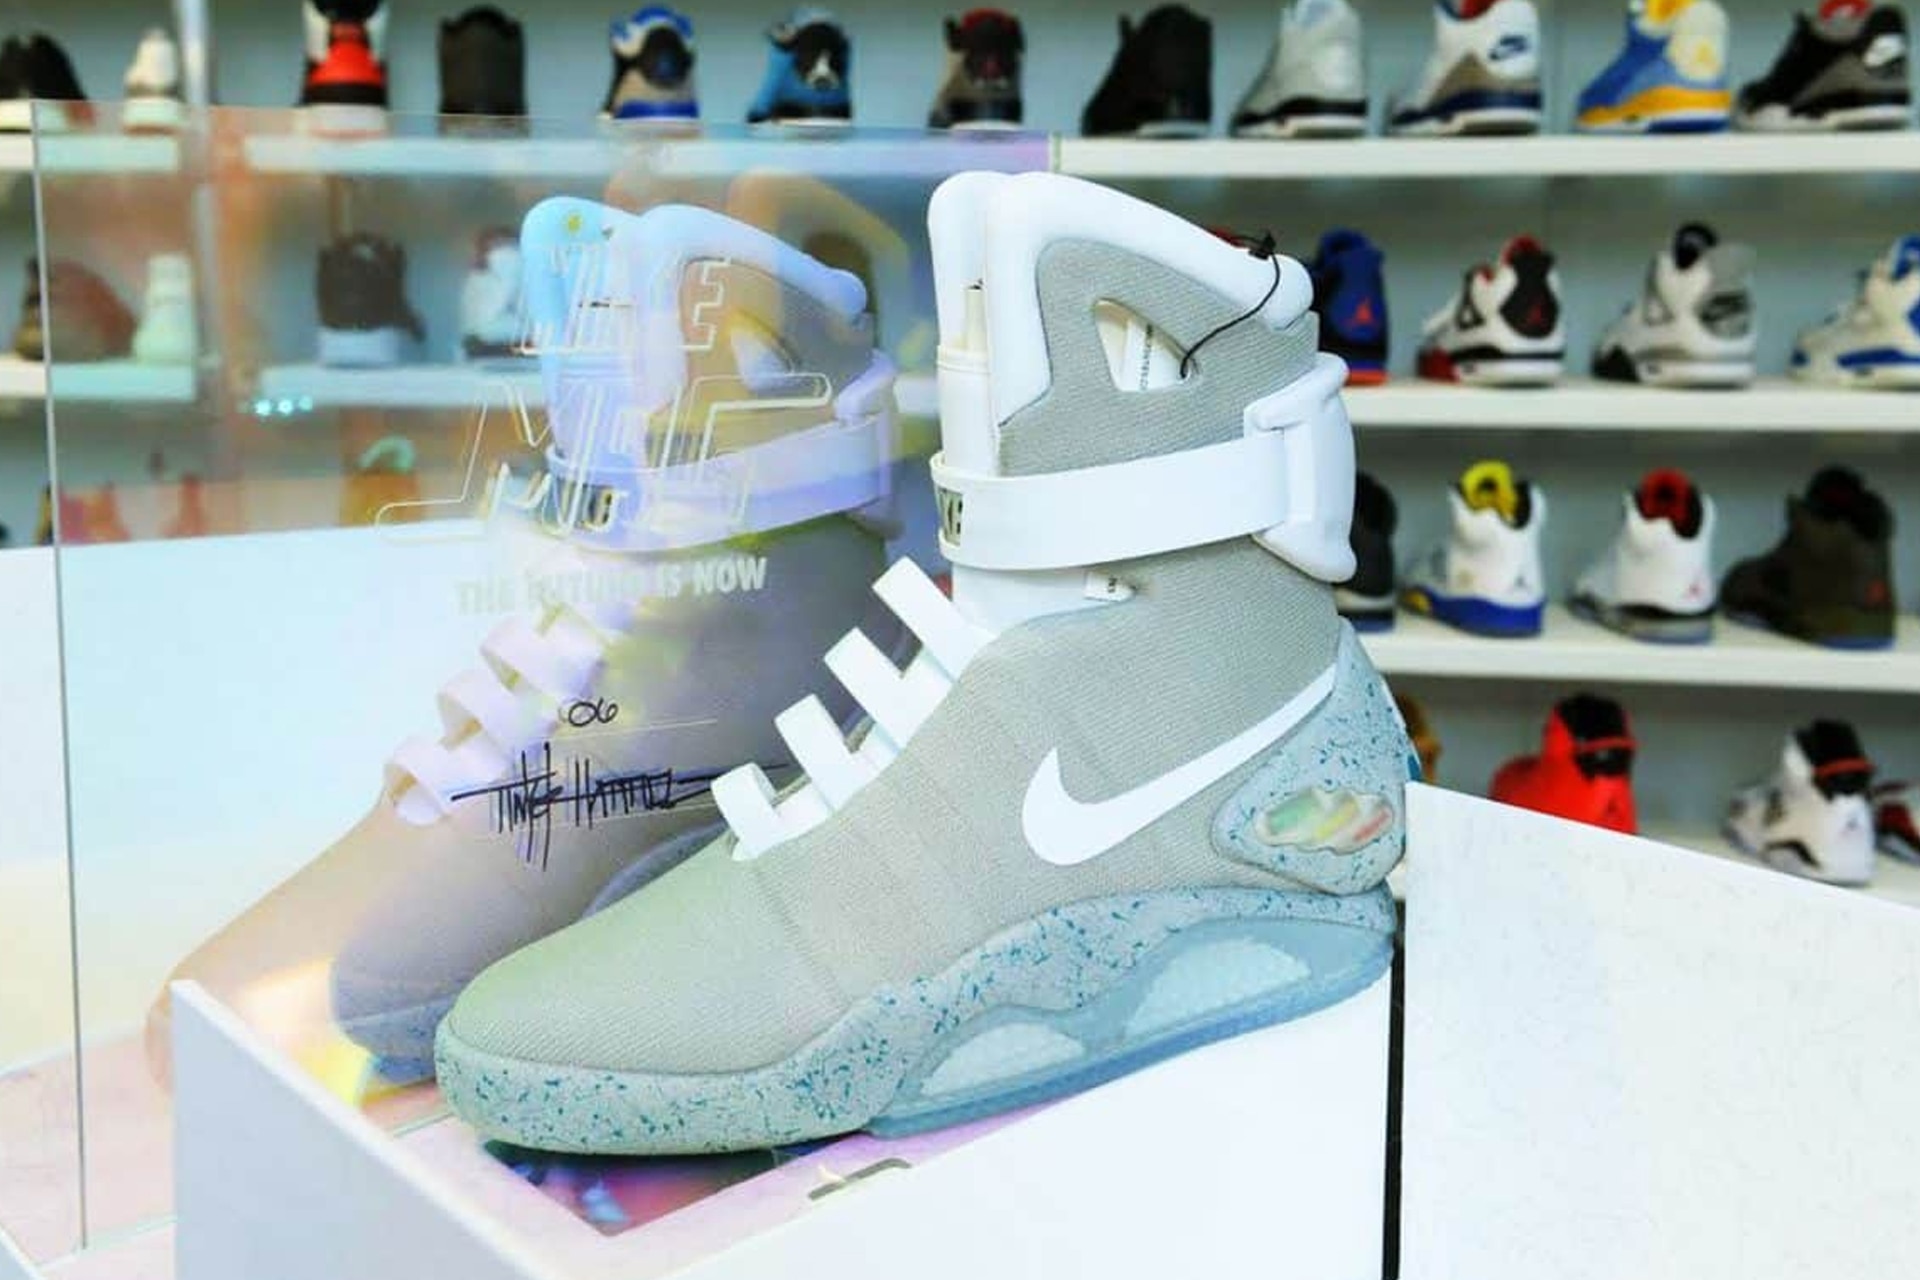 You Can Now Buy Marty Original Nike Air MAG Sneakers For $71,000 - GQ Australia